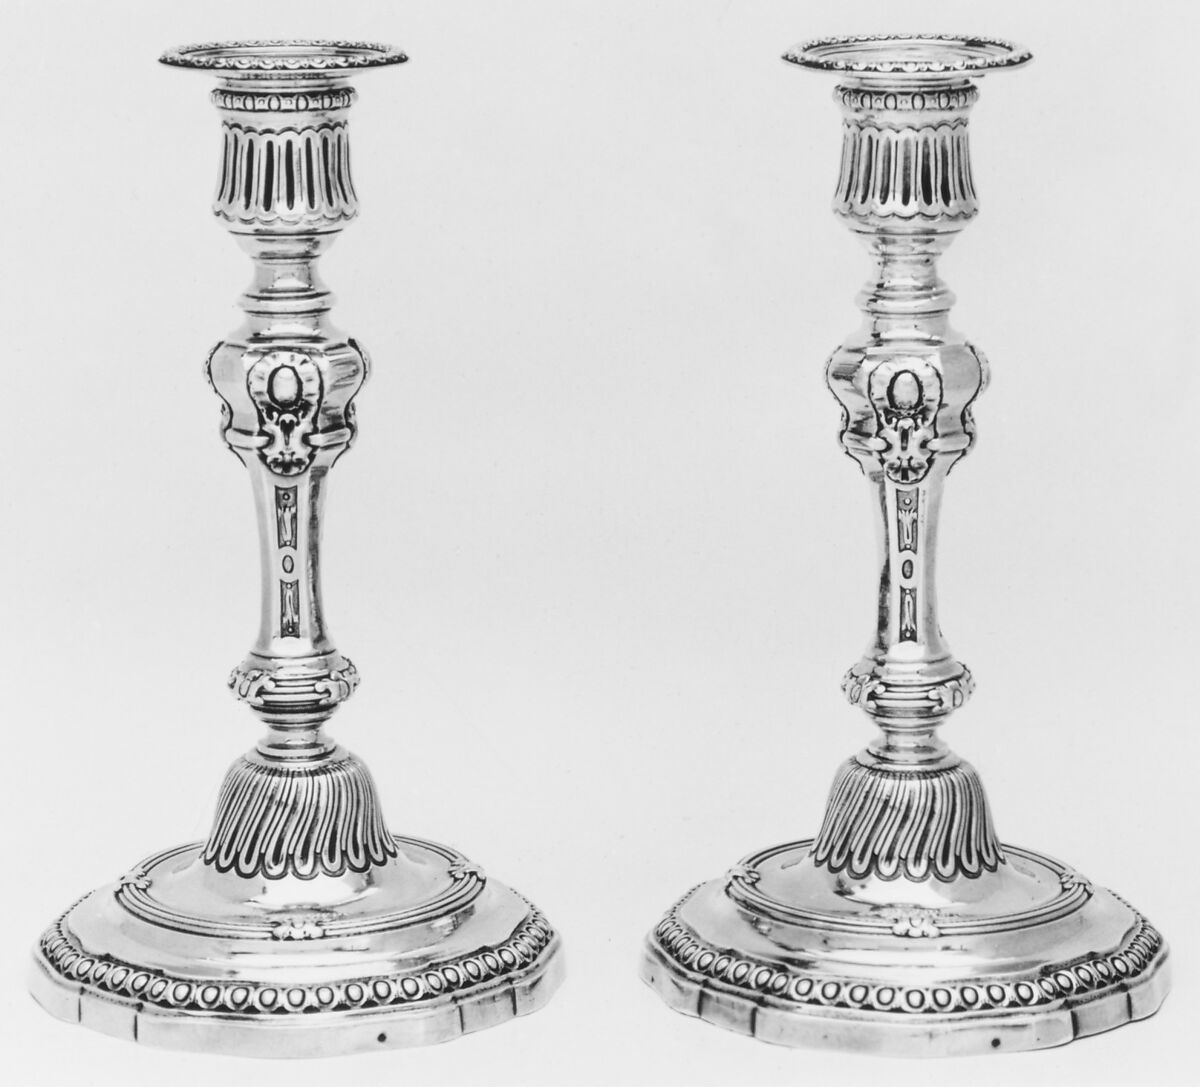 Pair of candlesticks, Jean-François Balzac (1711–1766, master by privilege of court service 1749, master in Paris guild 1755), Silver, French, Paris 